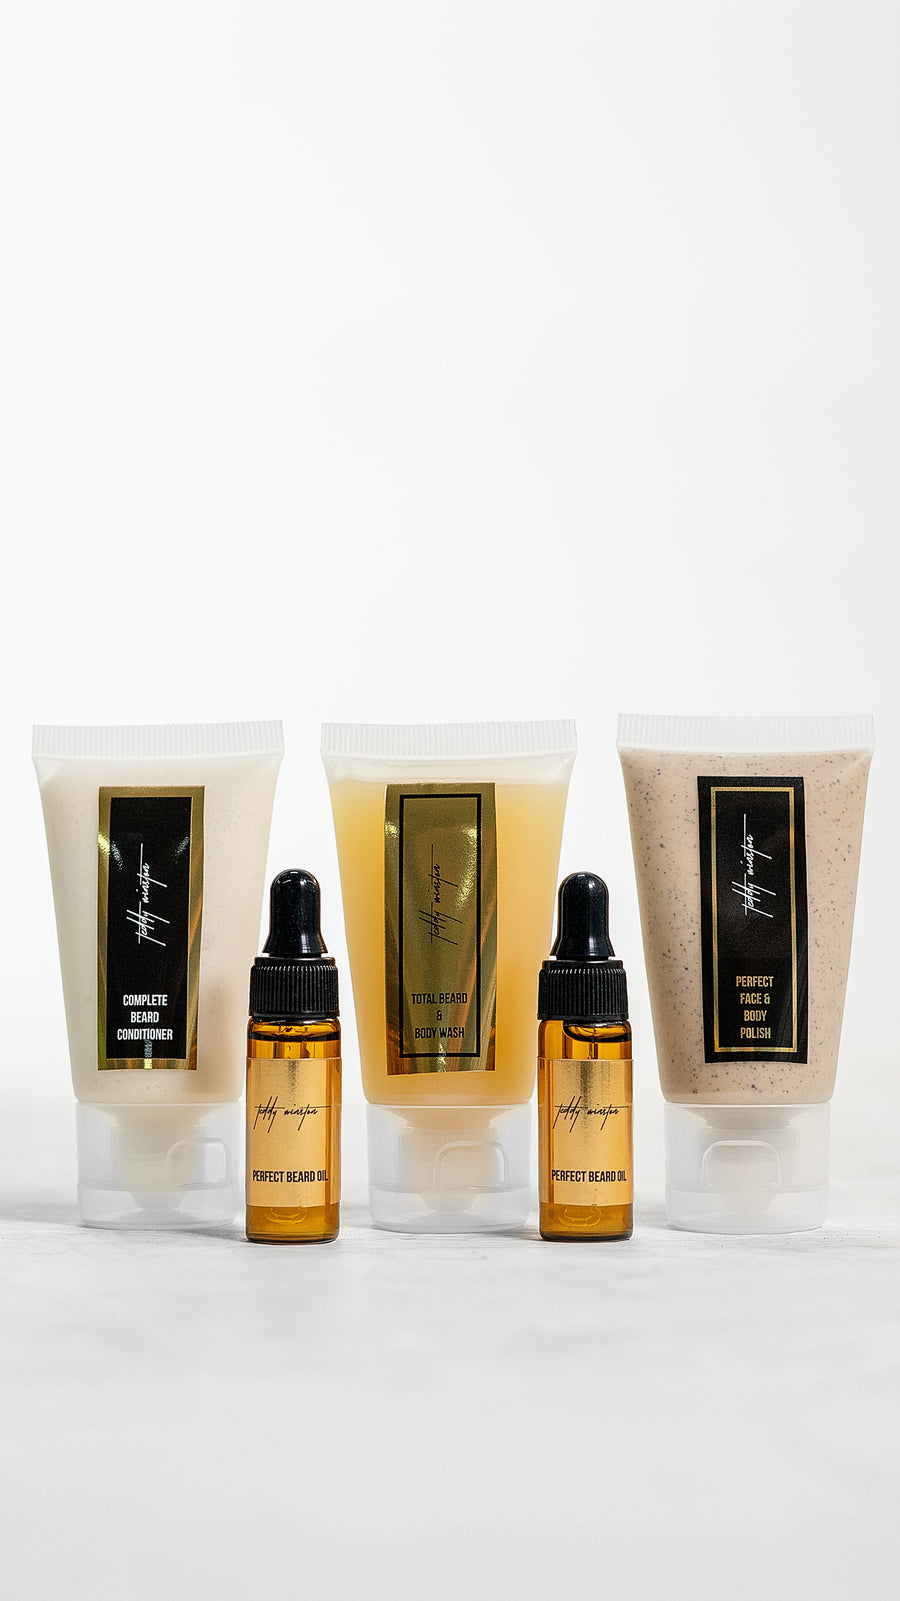 The Ultimate beard care and growth trial pack